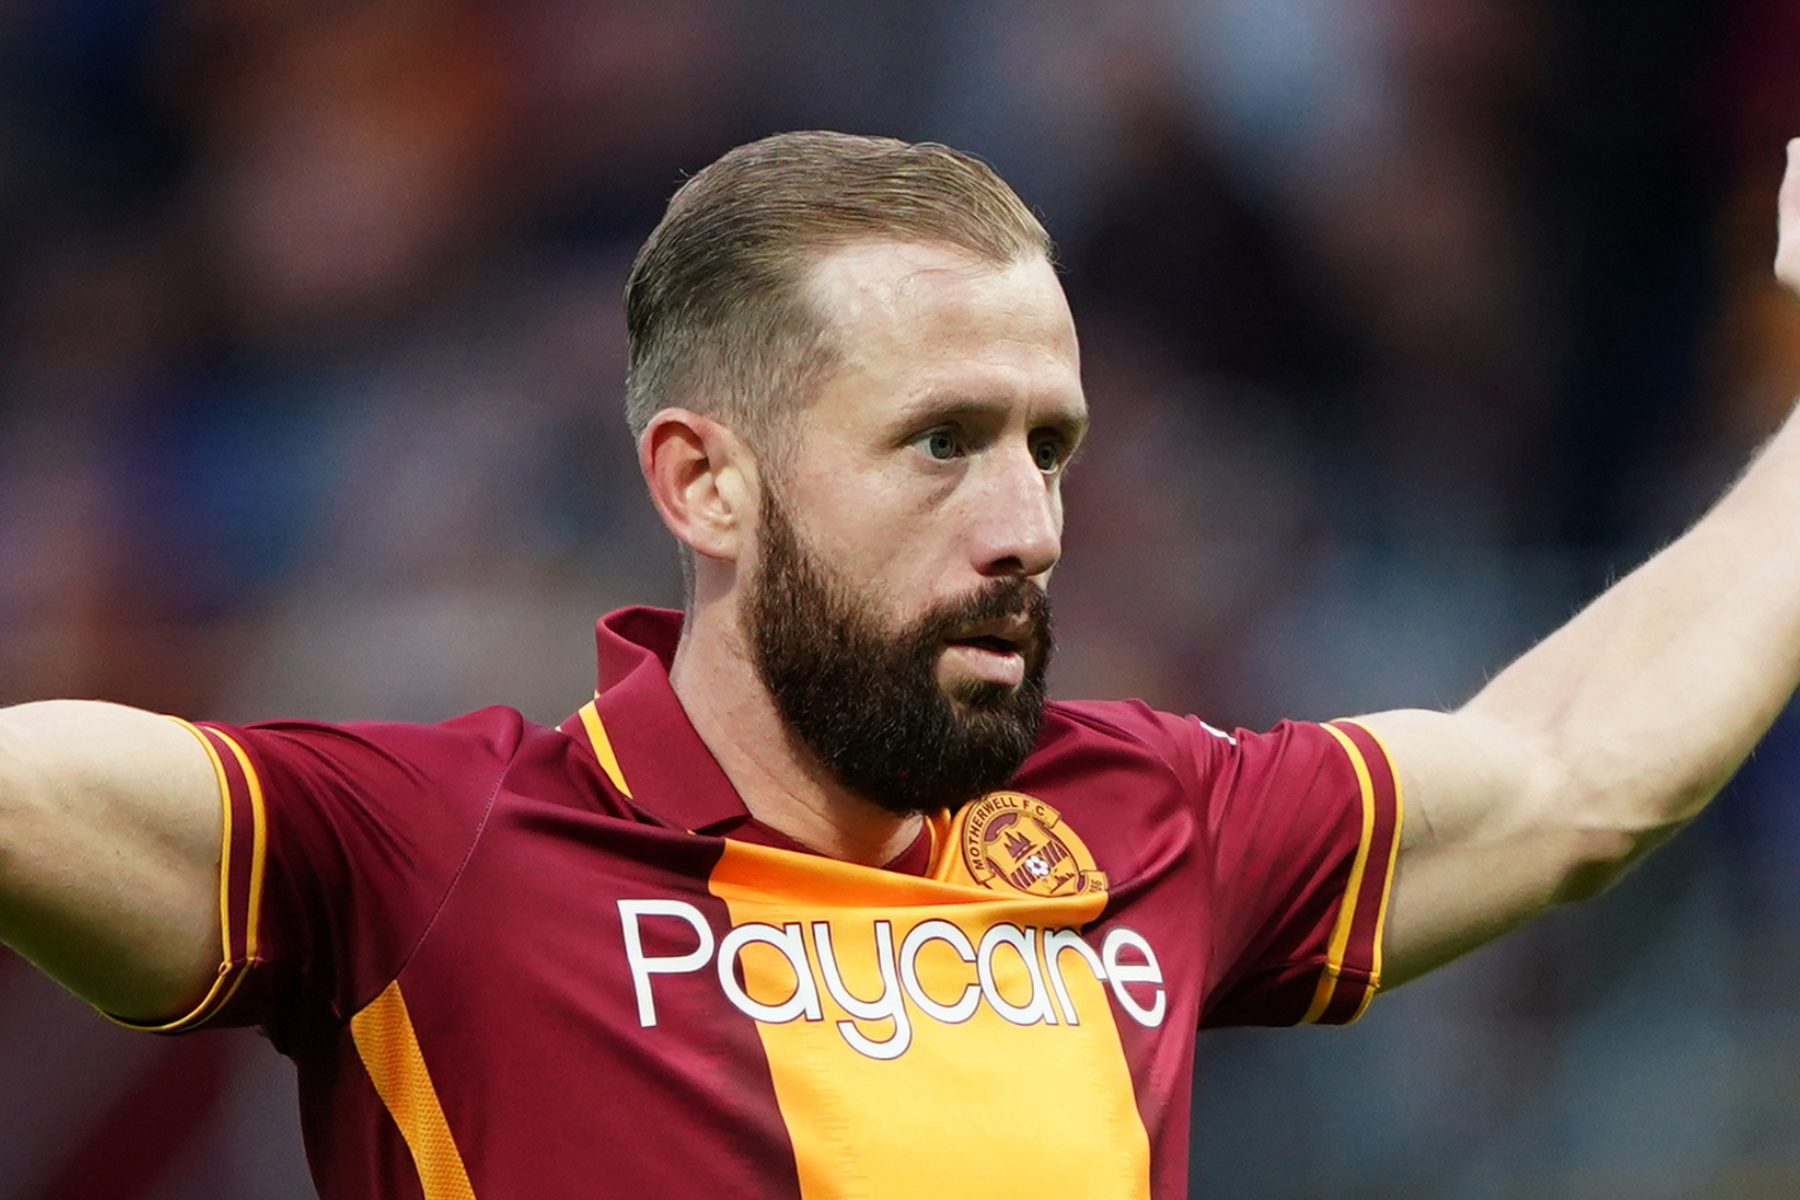 Scottish clubs couldn't afford Kevin van Veen, says Motherwell boss